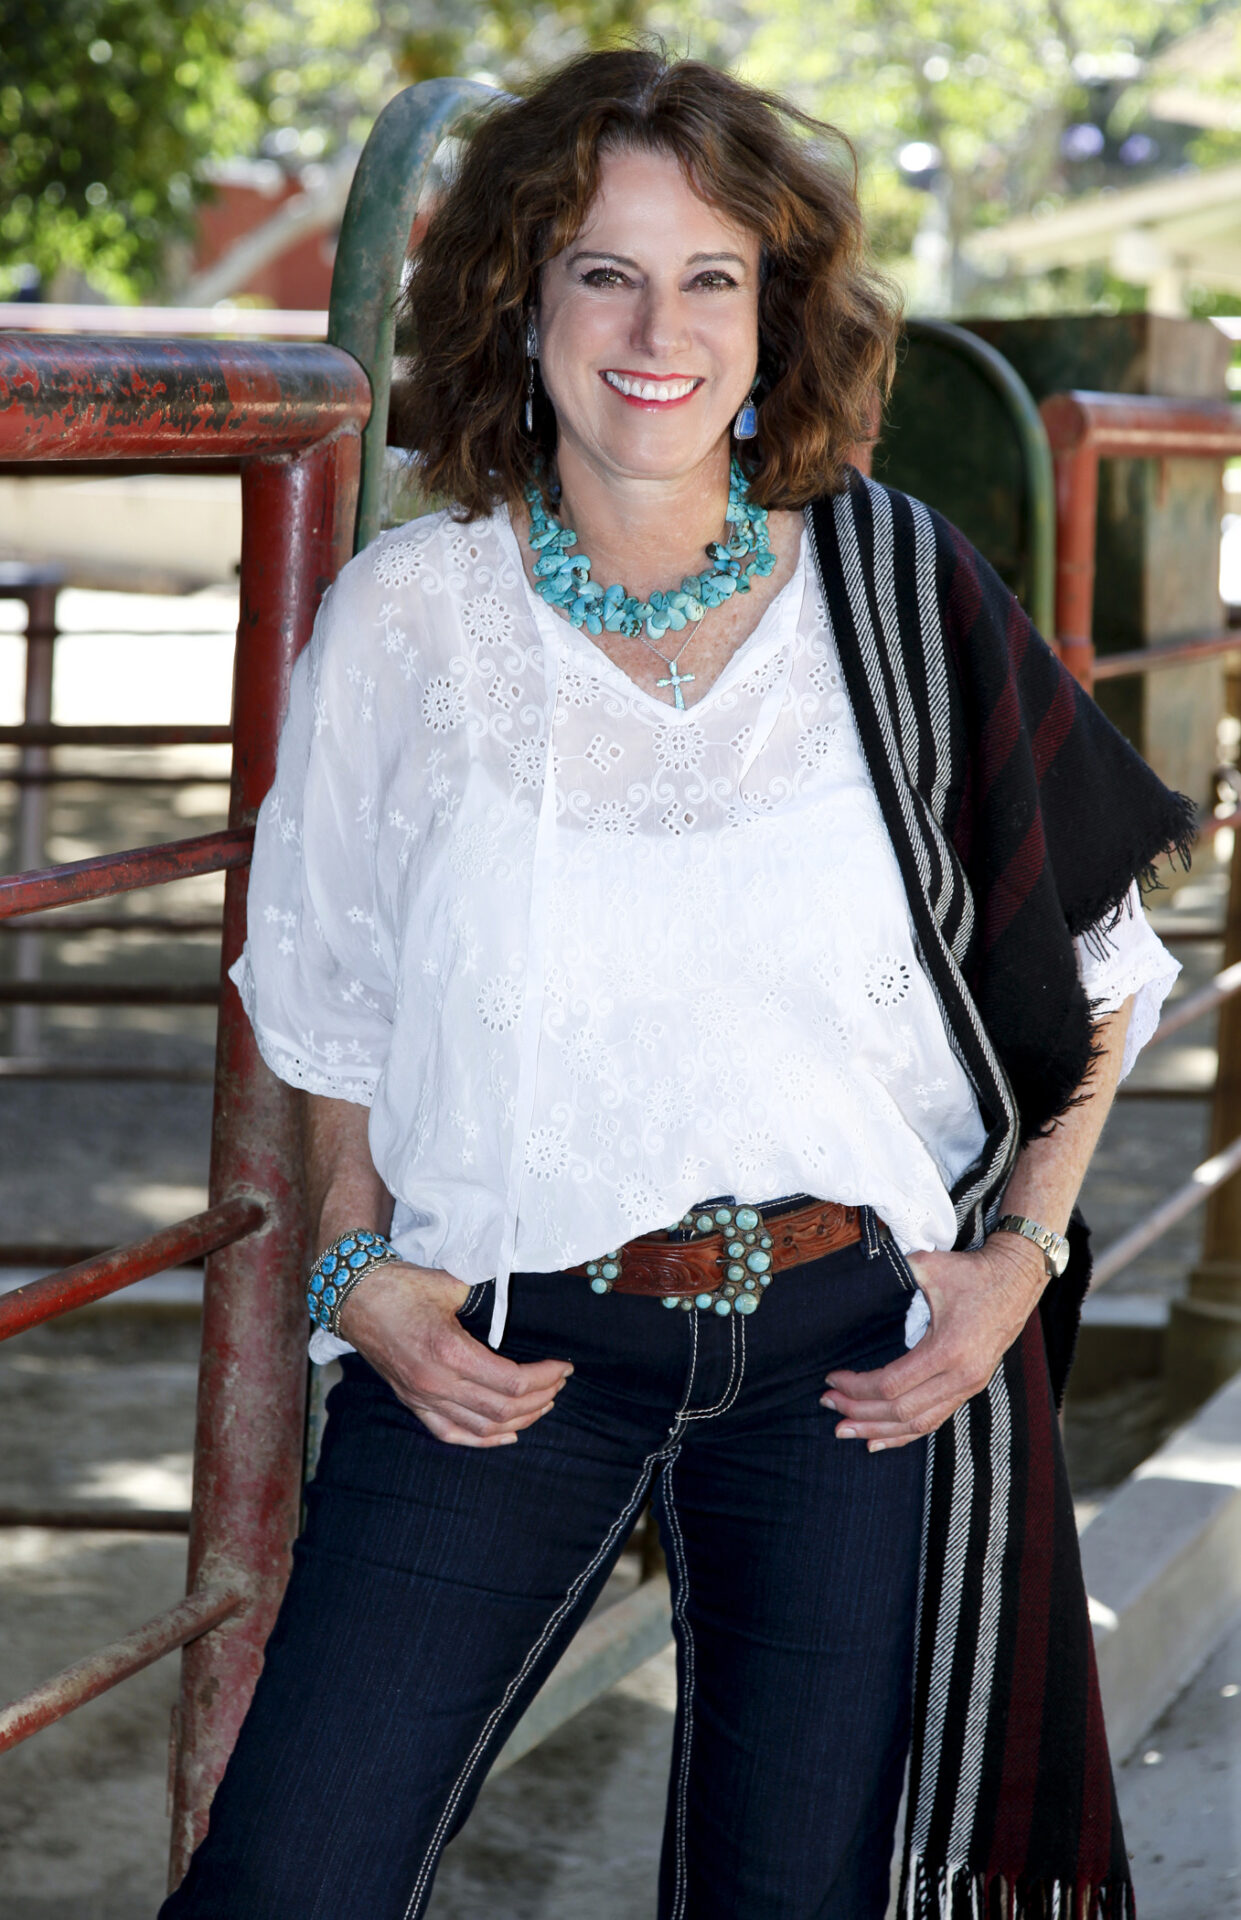 A woman wearing a white shirt and jeans.